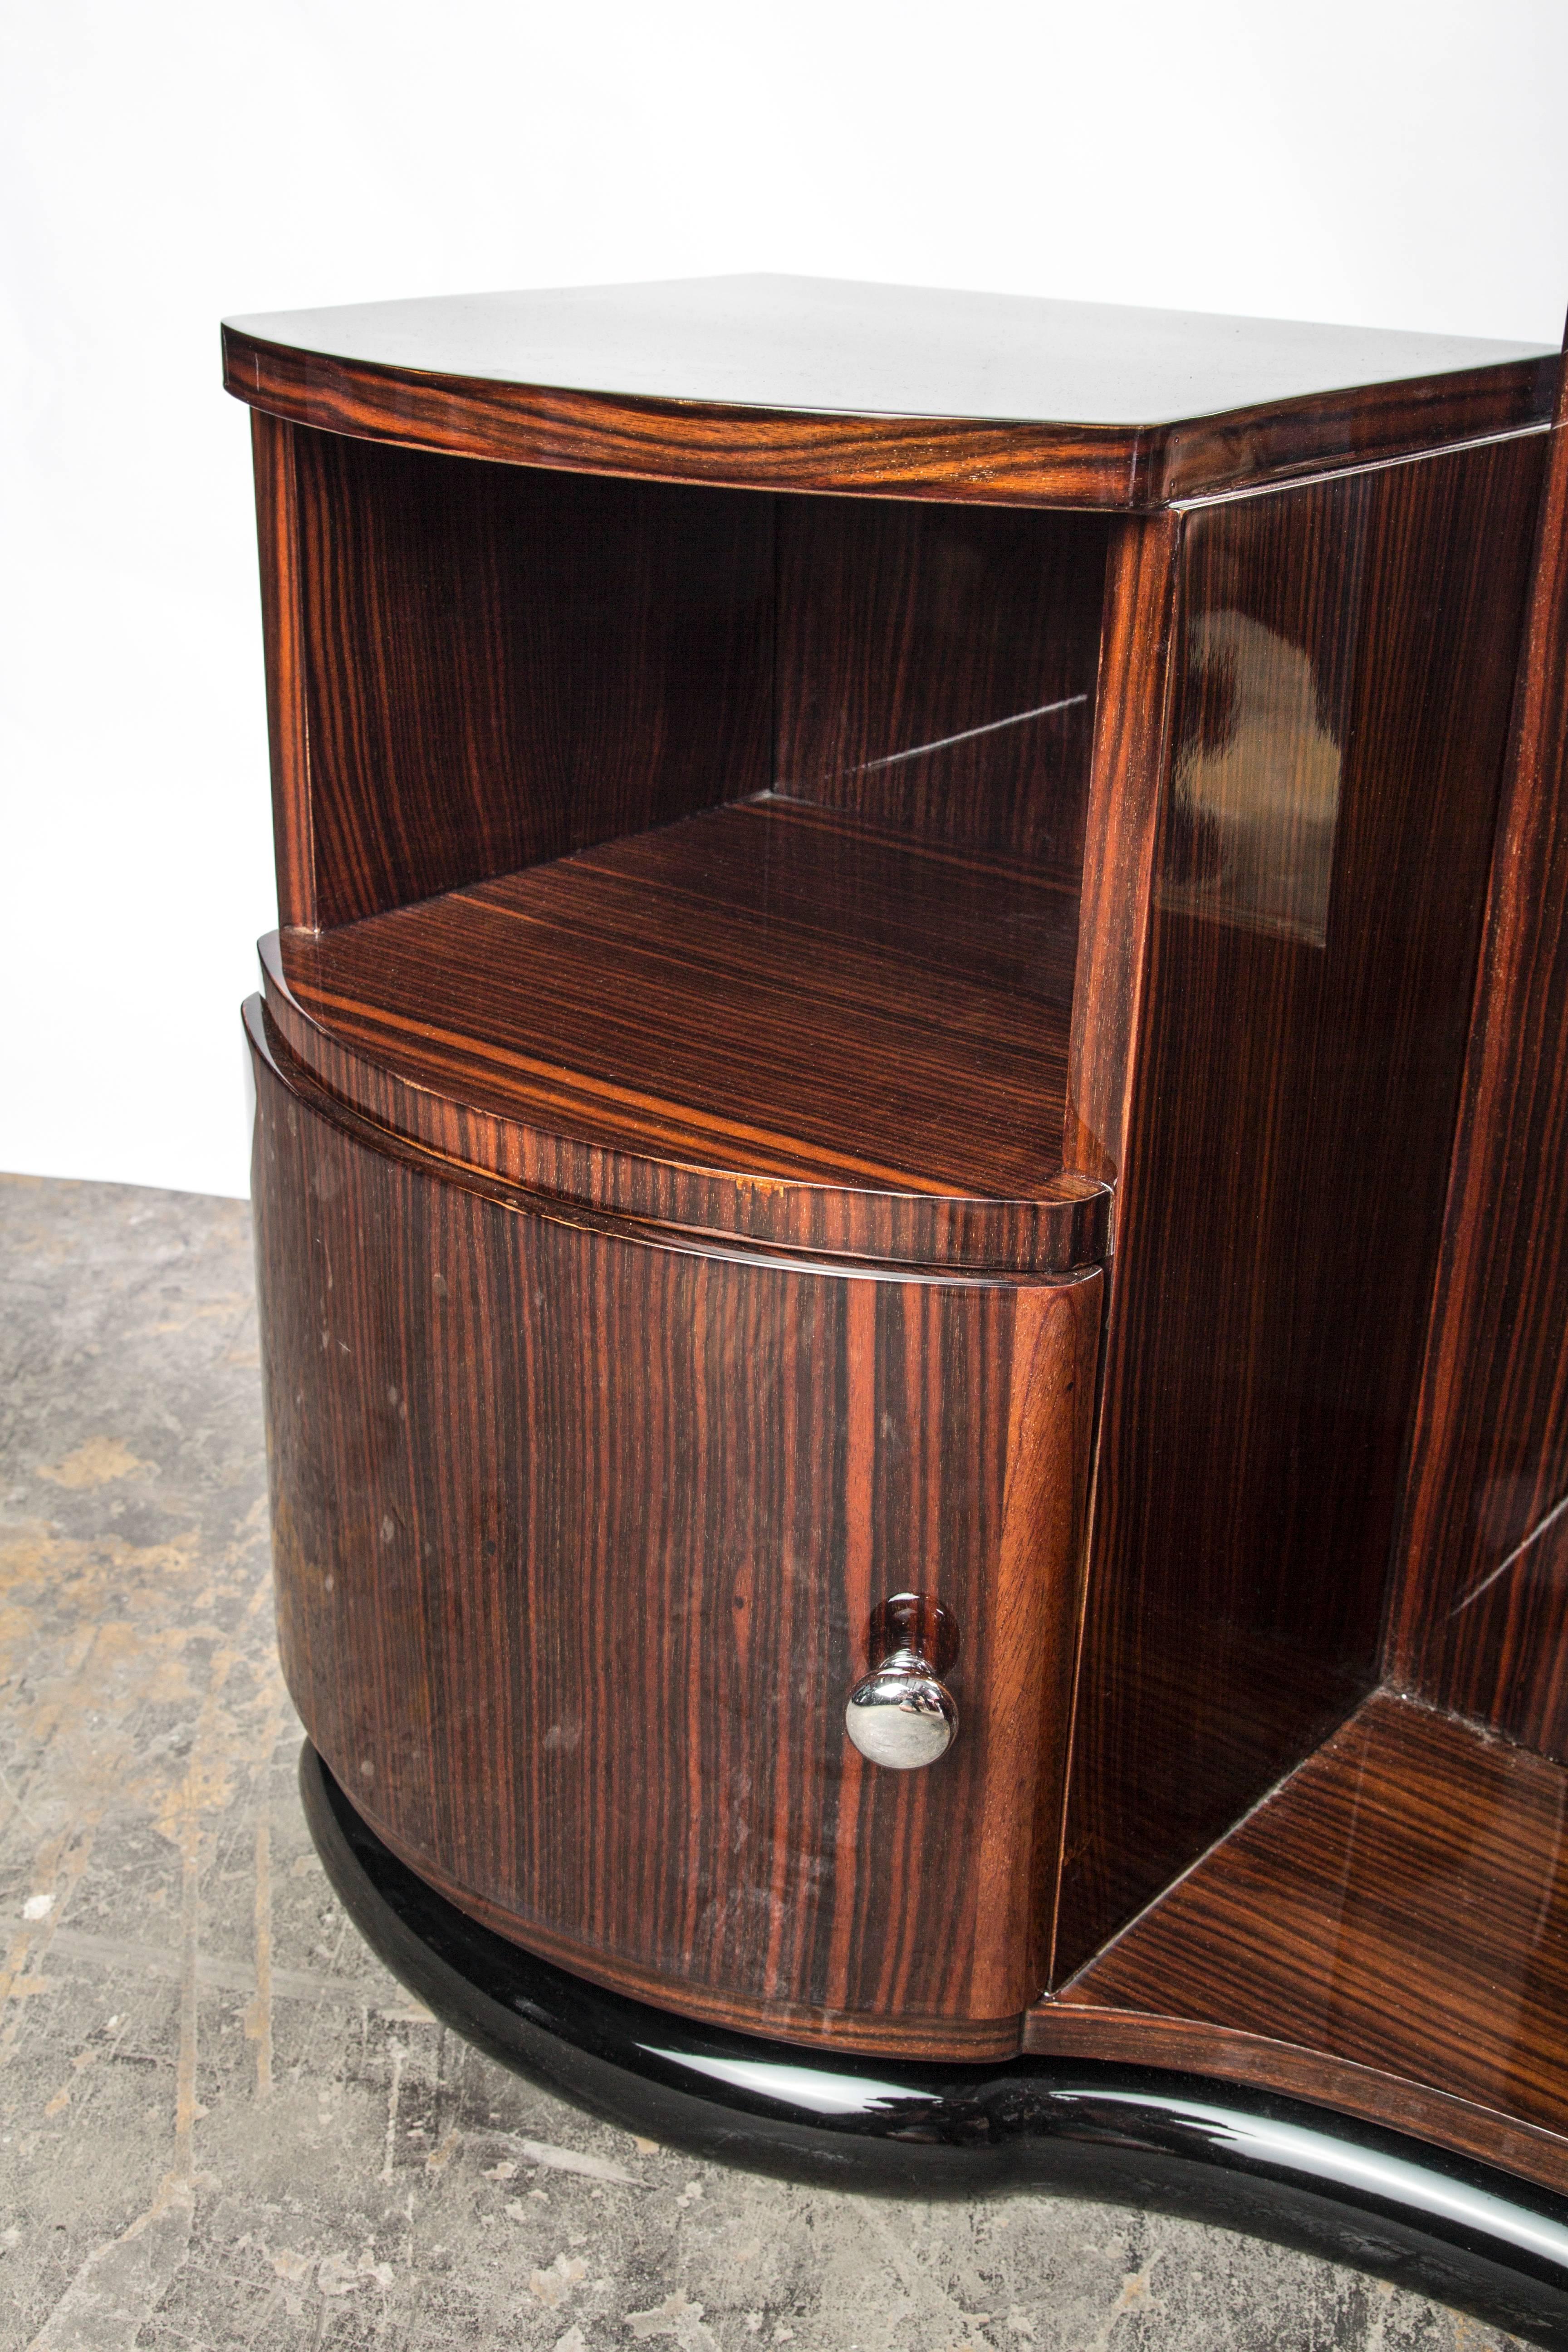 This magnificent Art Deco vanity/commode features burled Macassar wood in a high gloss finish, with chrome accents and a mirror in the center.